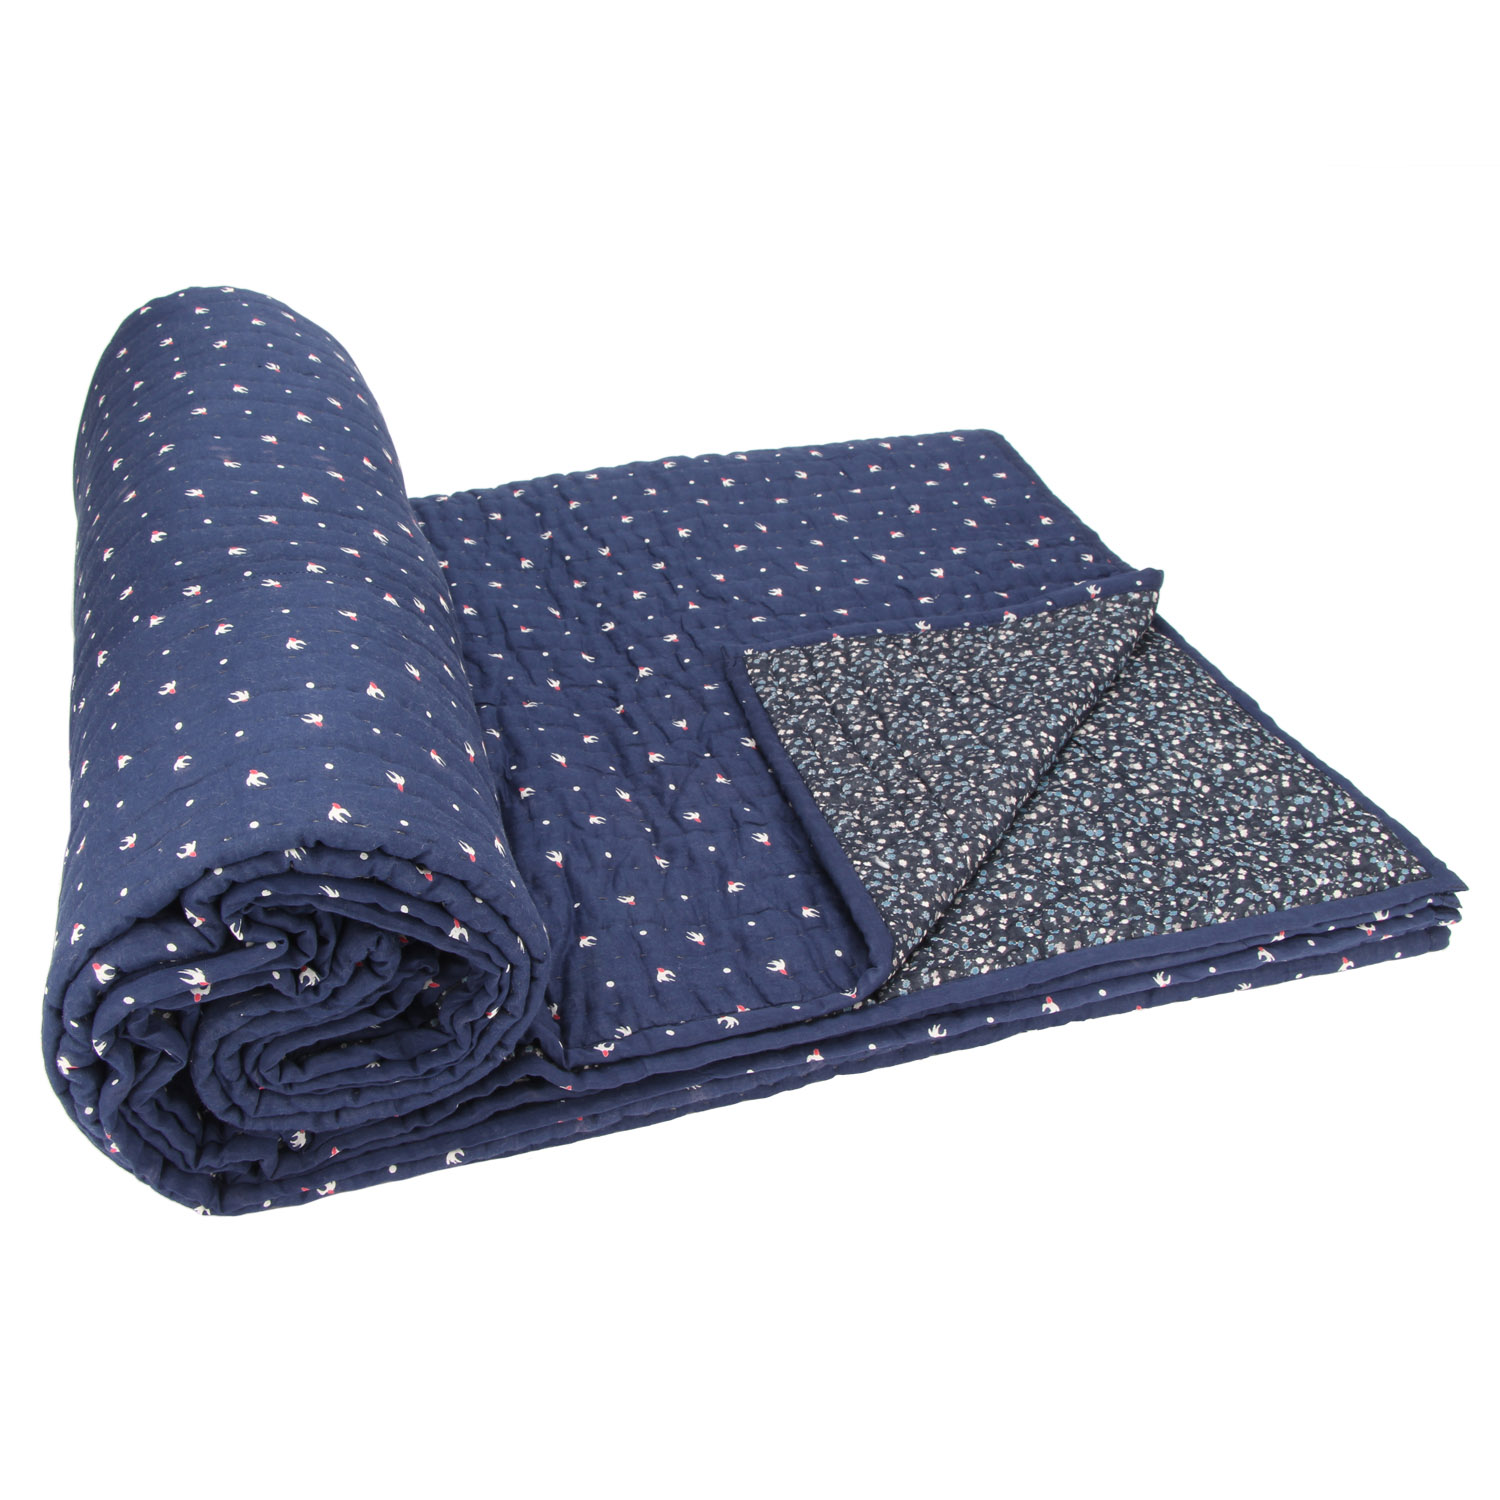 Craftofpinkcity Indigo Blue Kantha Quilt With cotton Sheet Queen made with Organic Cotton Soft and Lightweight; Breathable machine Stiches and Eco Friendly Bedspread Little Flower #05